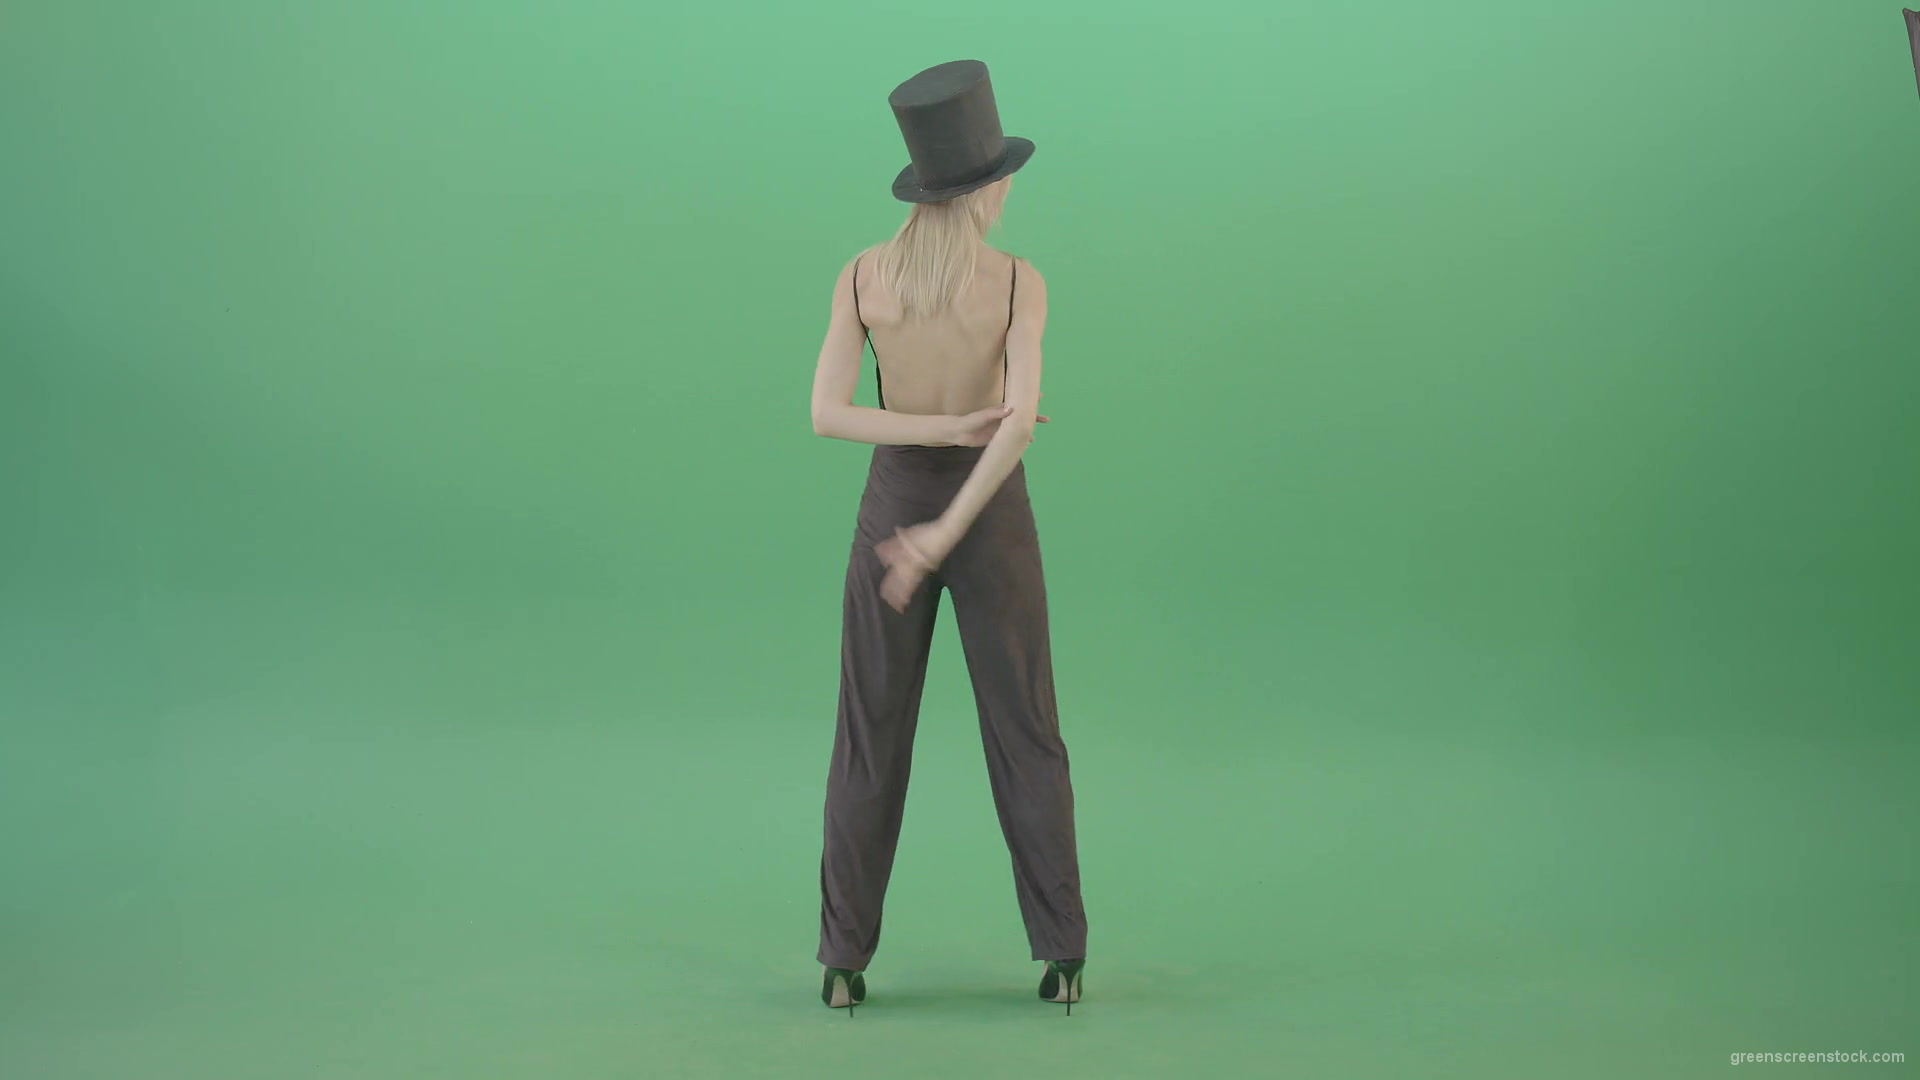 Magic-elegant-dancing-girl-slowly-moving-on-green-background-4K-Video-Footage-1920_007 Green Screen Stock